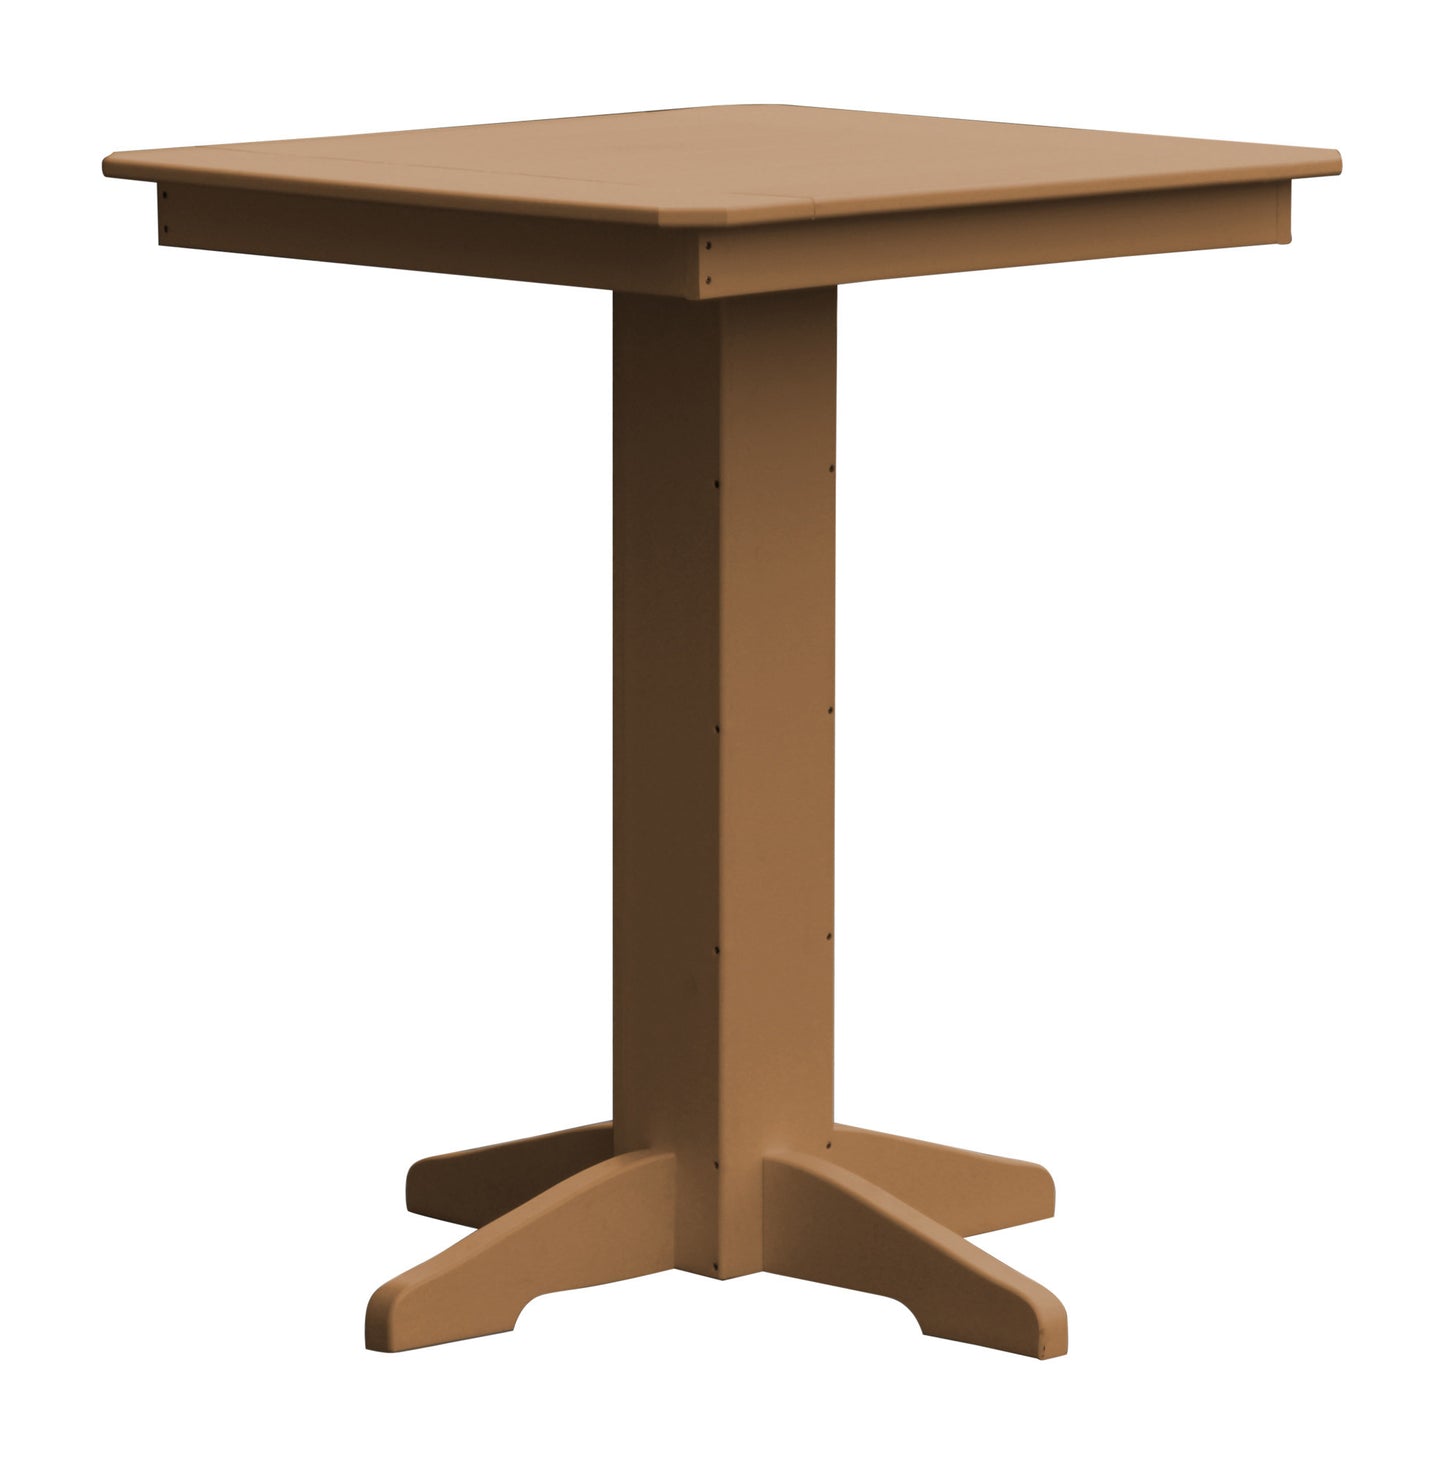 A&L Furniture Recycled Plastic 33" Square Bar Table - Cedar